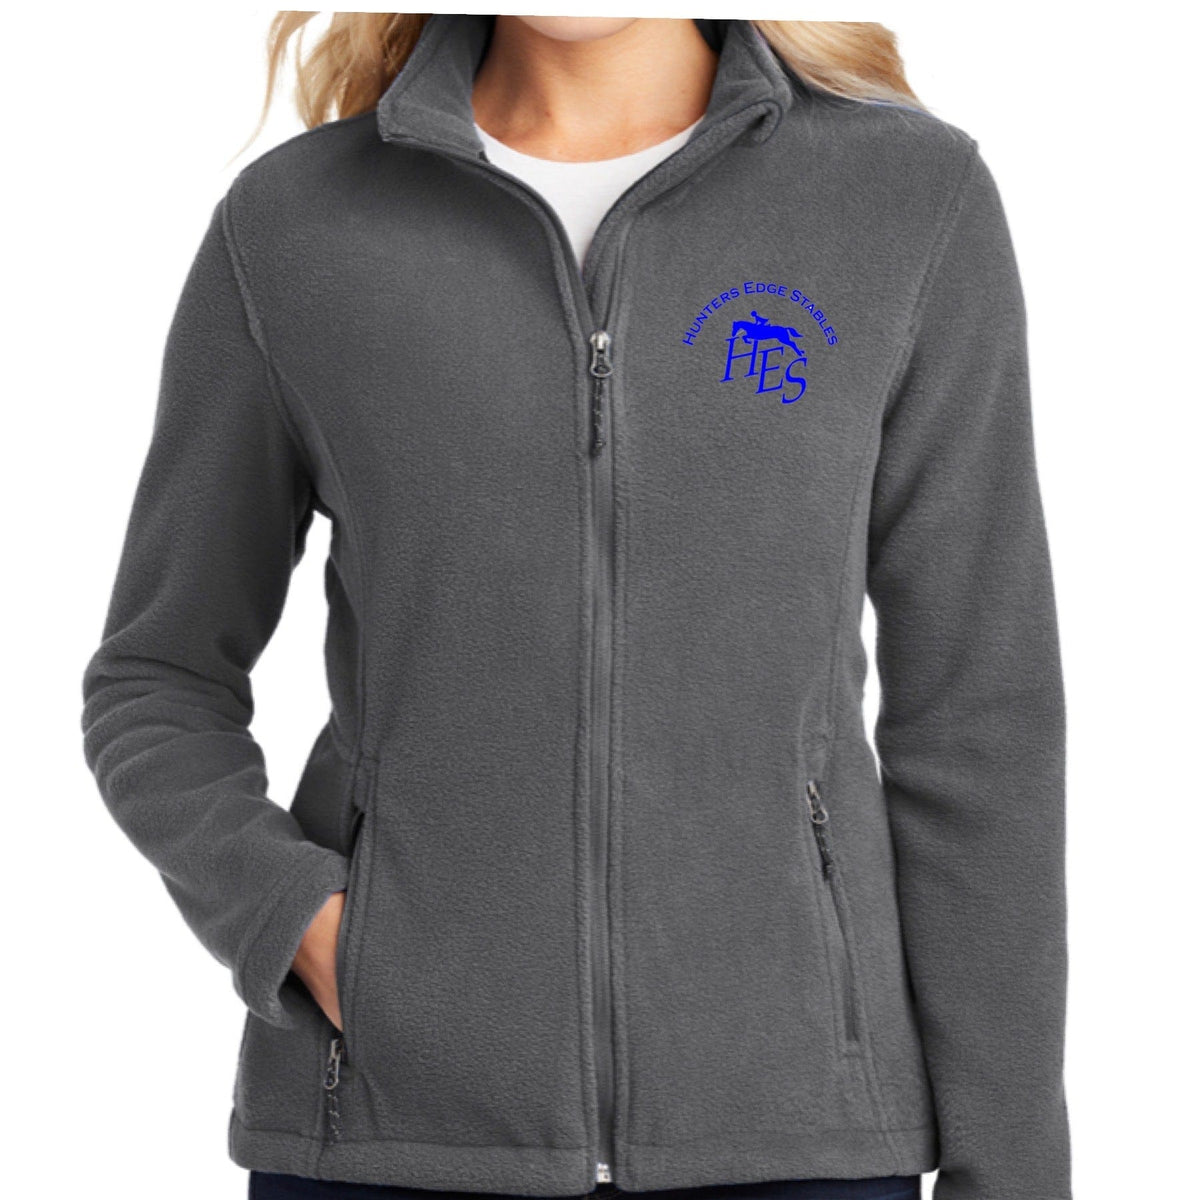 Equestrian Team Apparel Hunters Edge Stables Fleece Jacket equestrian team apparel online tack store mobile tack store custom farm apparel custom show stable clothing equestrian lifestyle horse show clothing riding clothes horses equestrian tack store